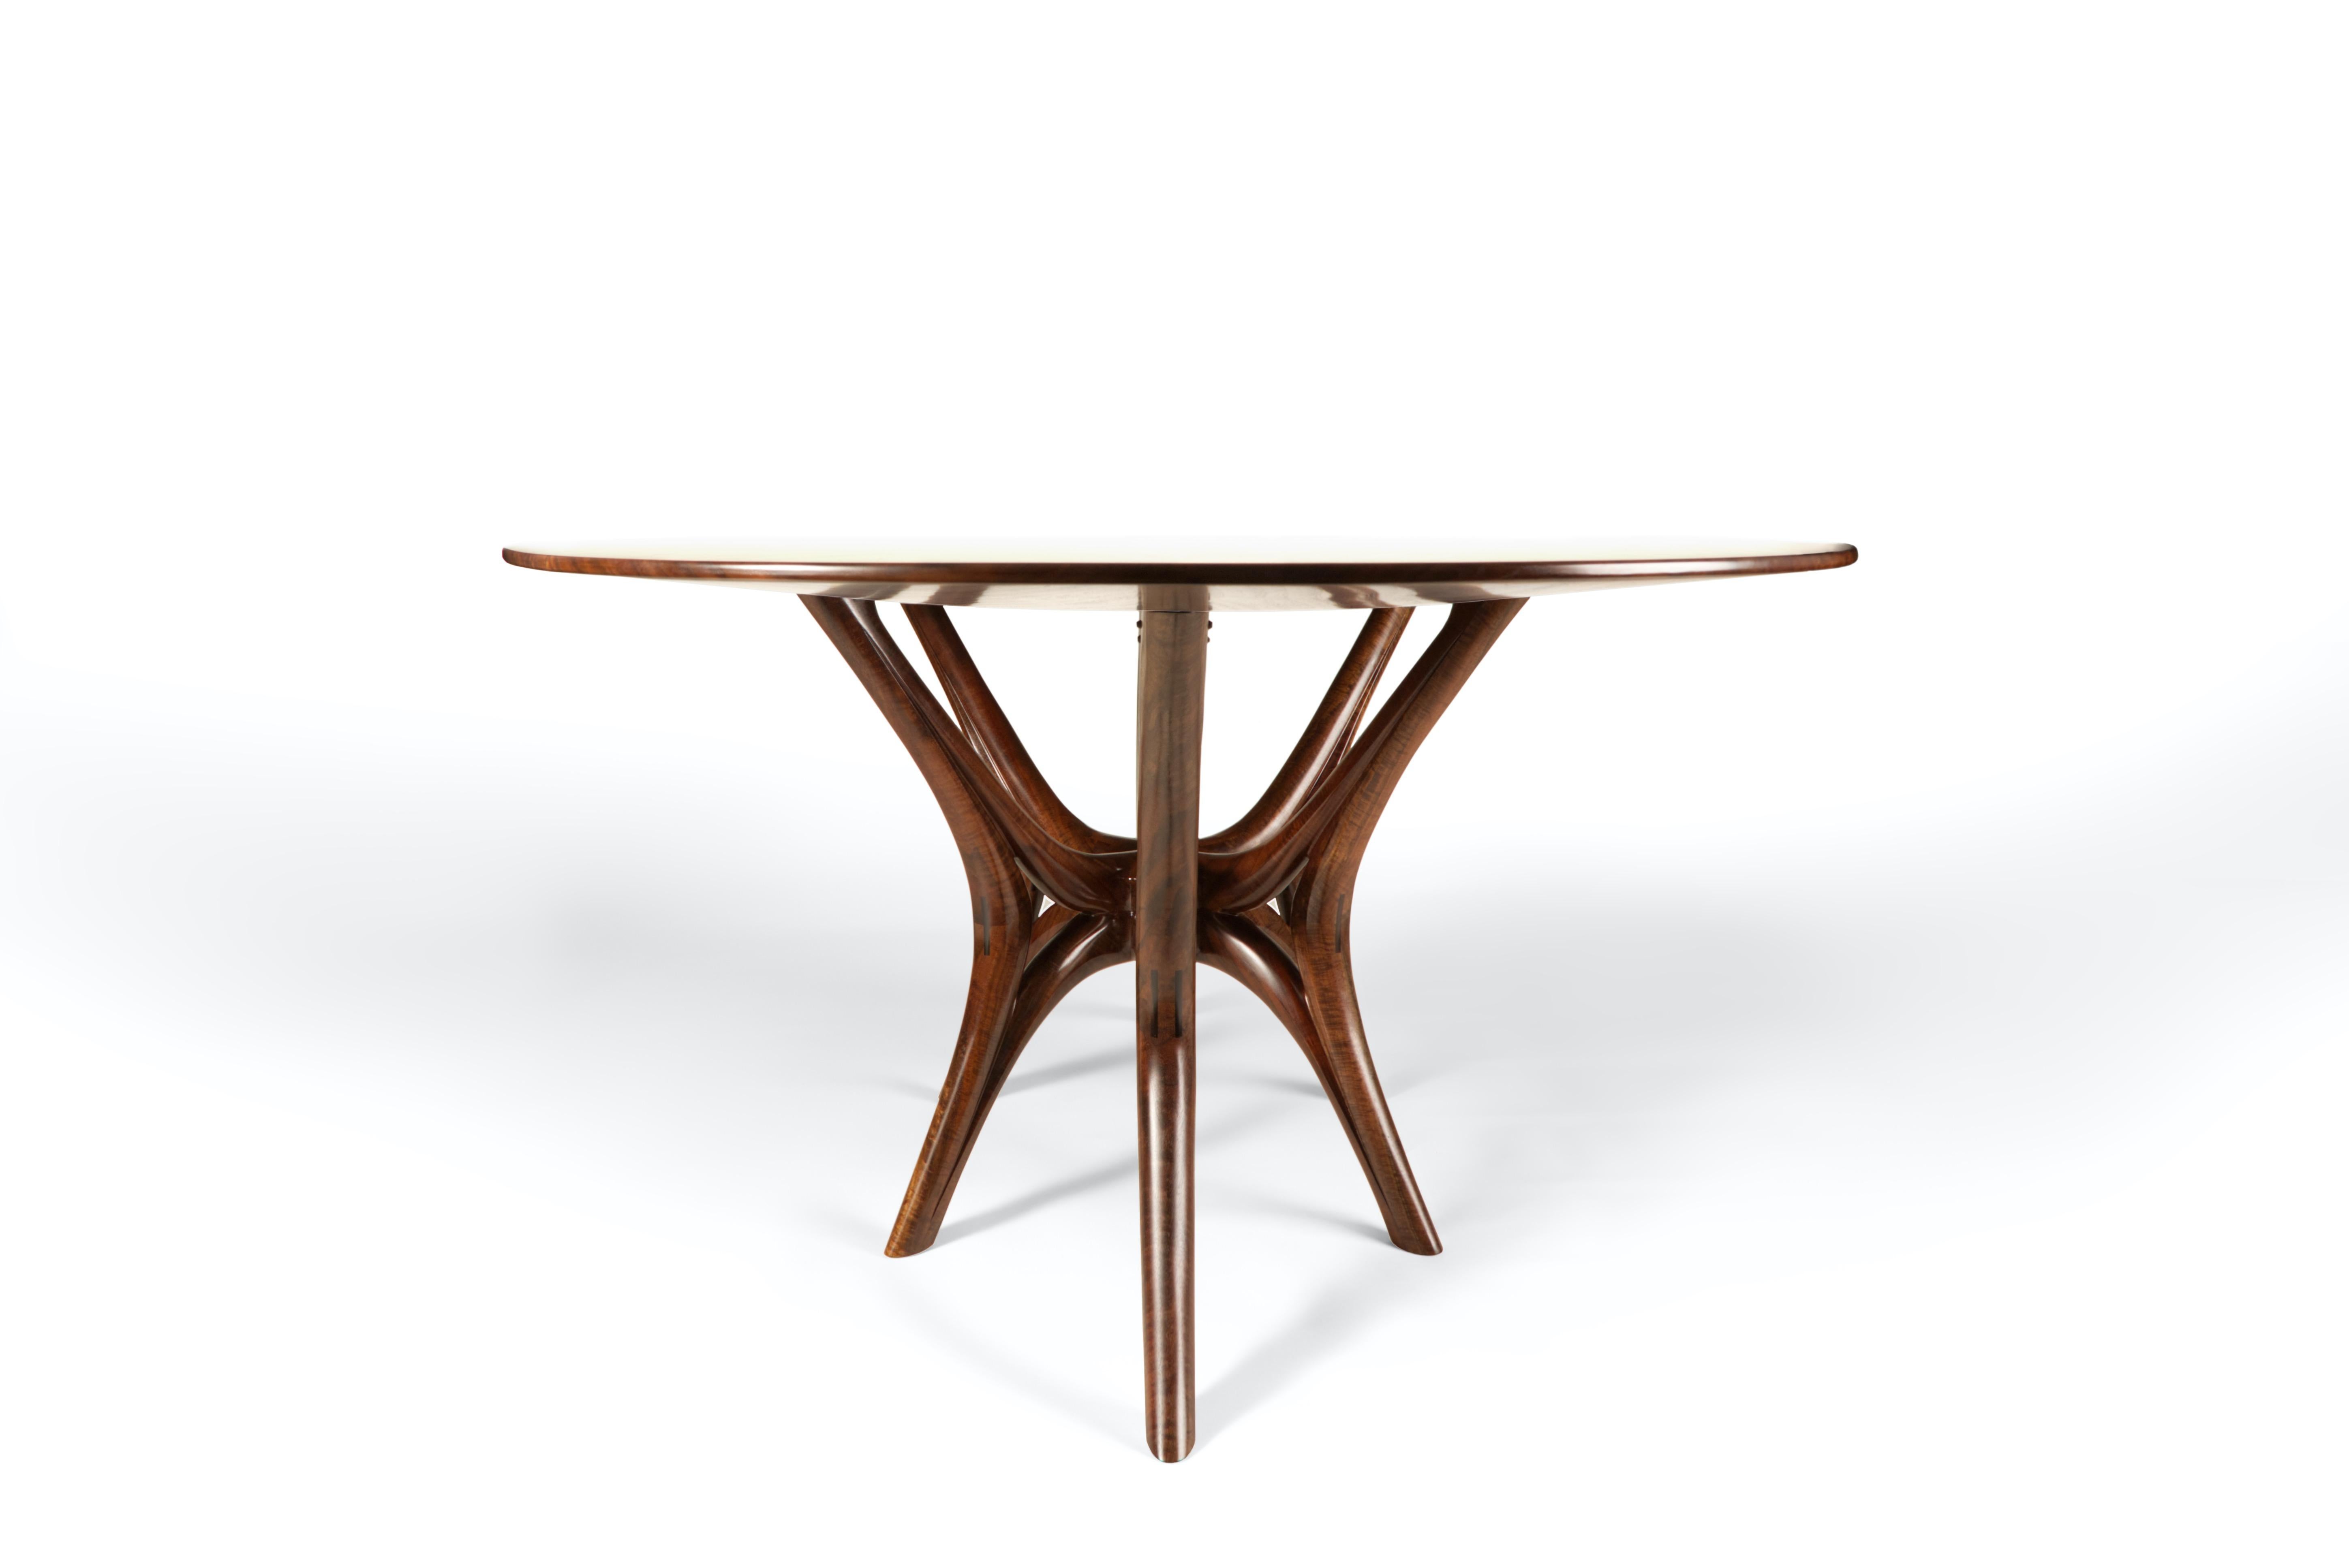 Handcrafted from solid Walnut, this web-leg dining table is a statement in Craft and design. It's hand carved legs offer an incredible sense of movement and the tapered profile of the table top makes it appear to almost be floating in space. This